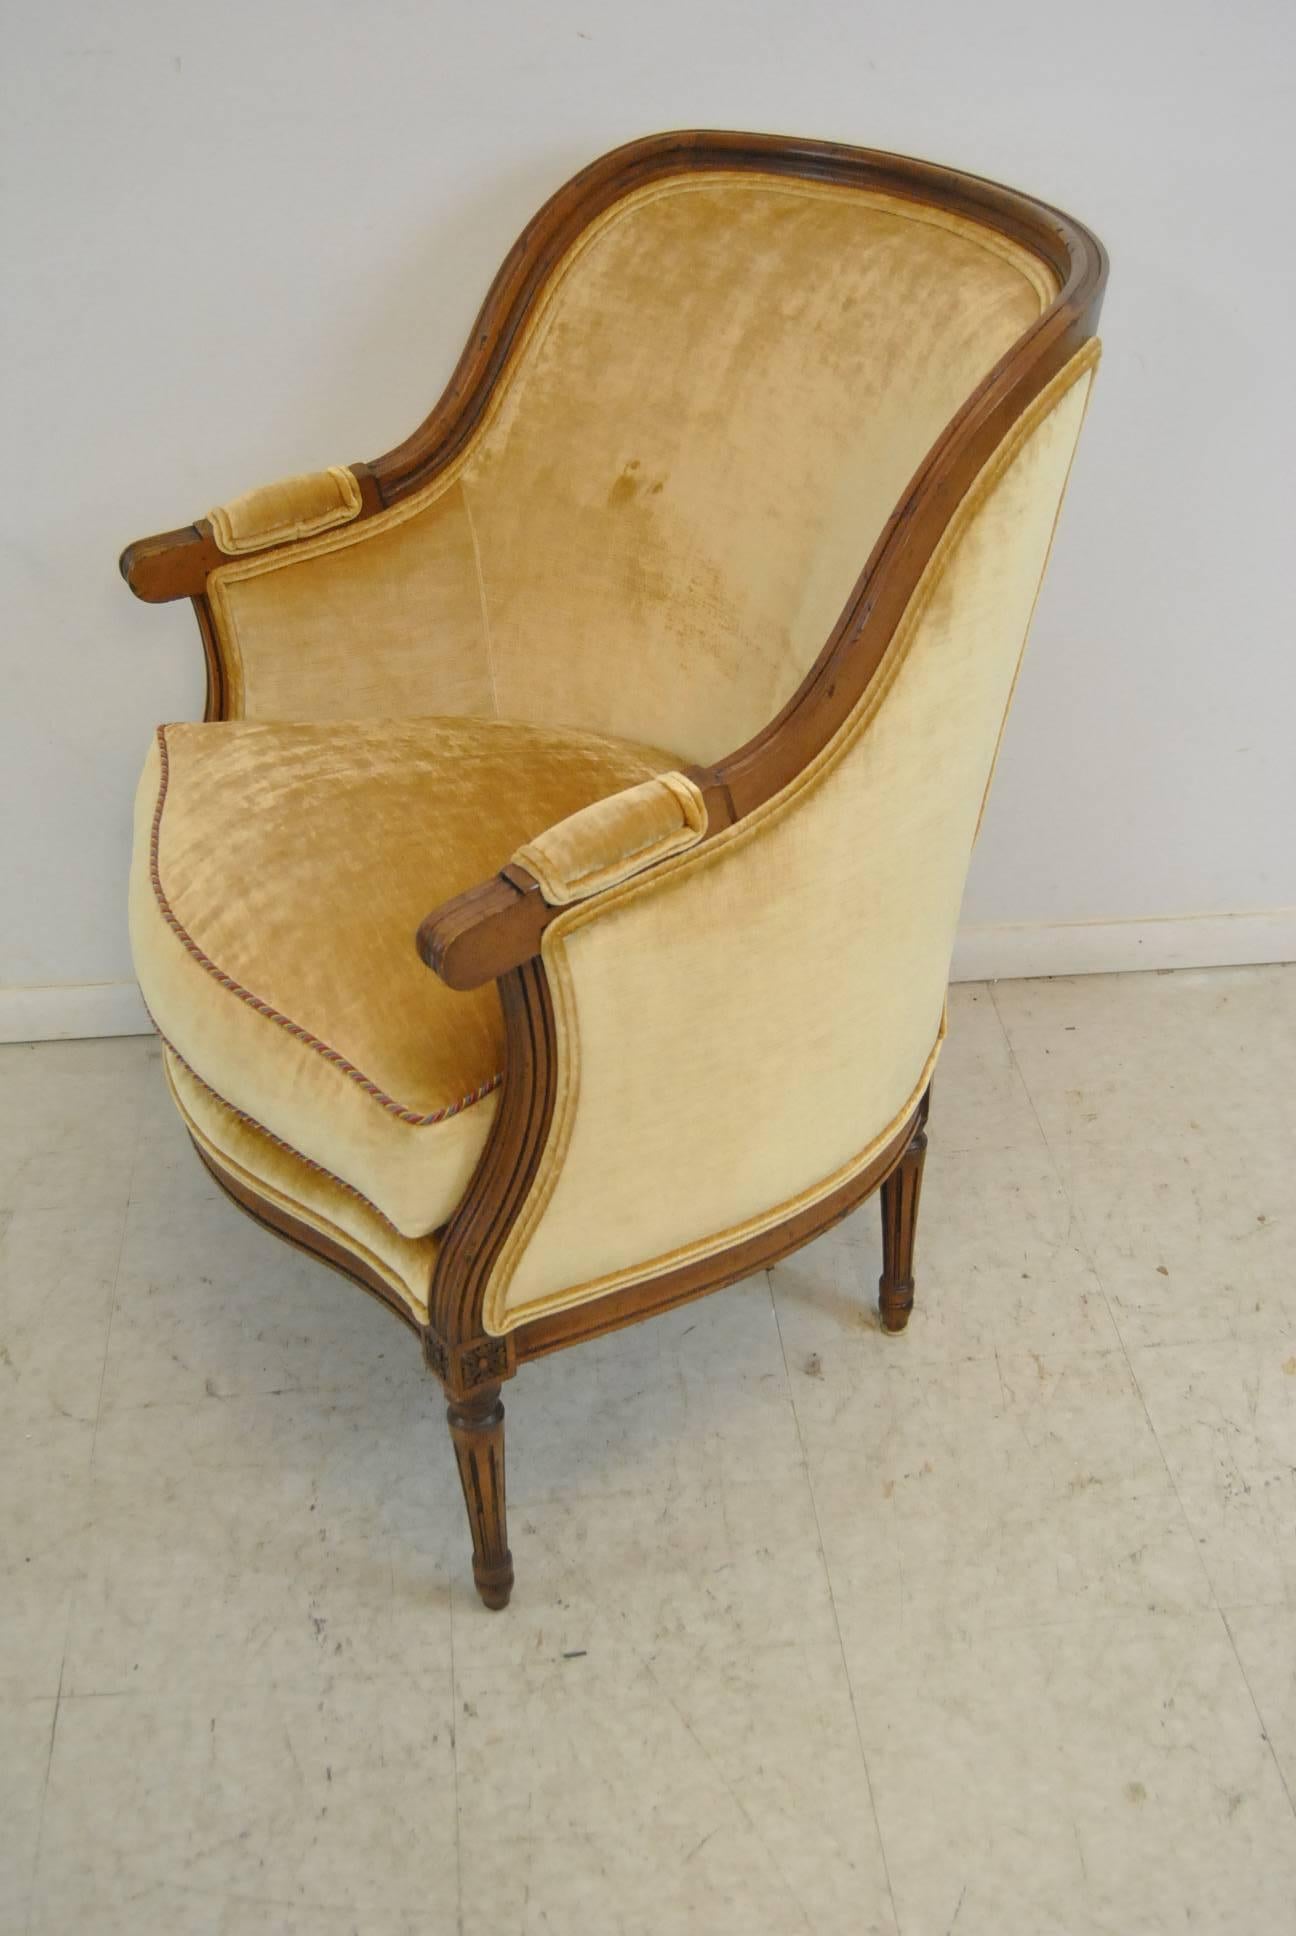 A fabulous French style upholstered bergere chair by Isenhour Furniture. This charming chair features a finely carved hardwood frame, a classic gold toned fabric and a removable down cushion. It is in very good to excellent condition. The dimensions